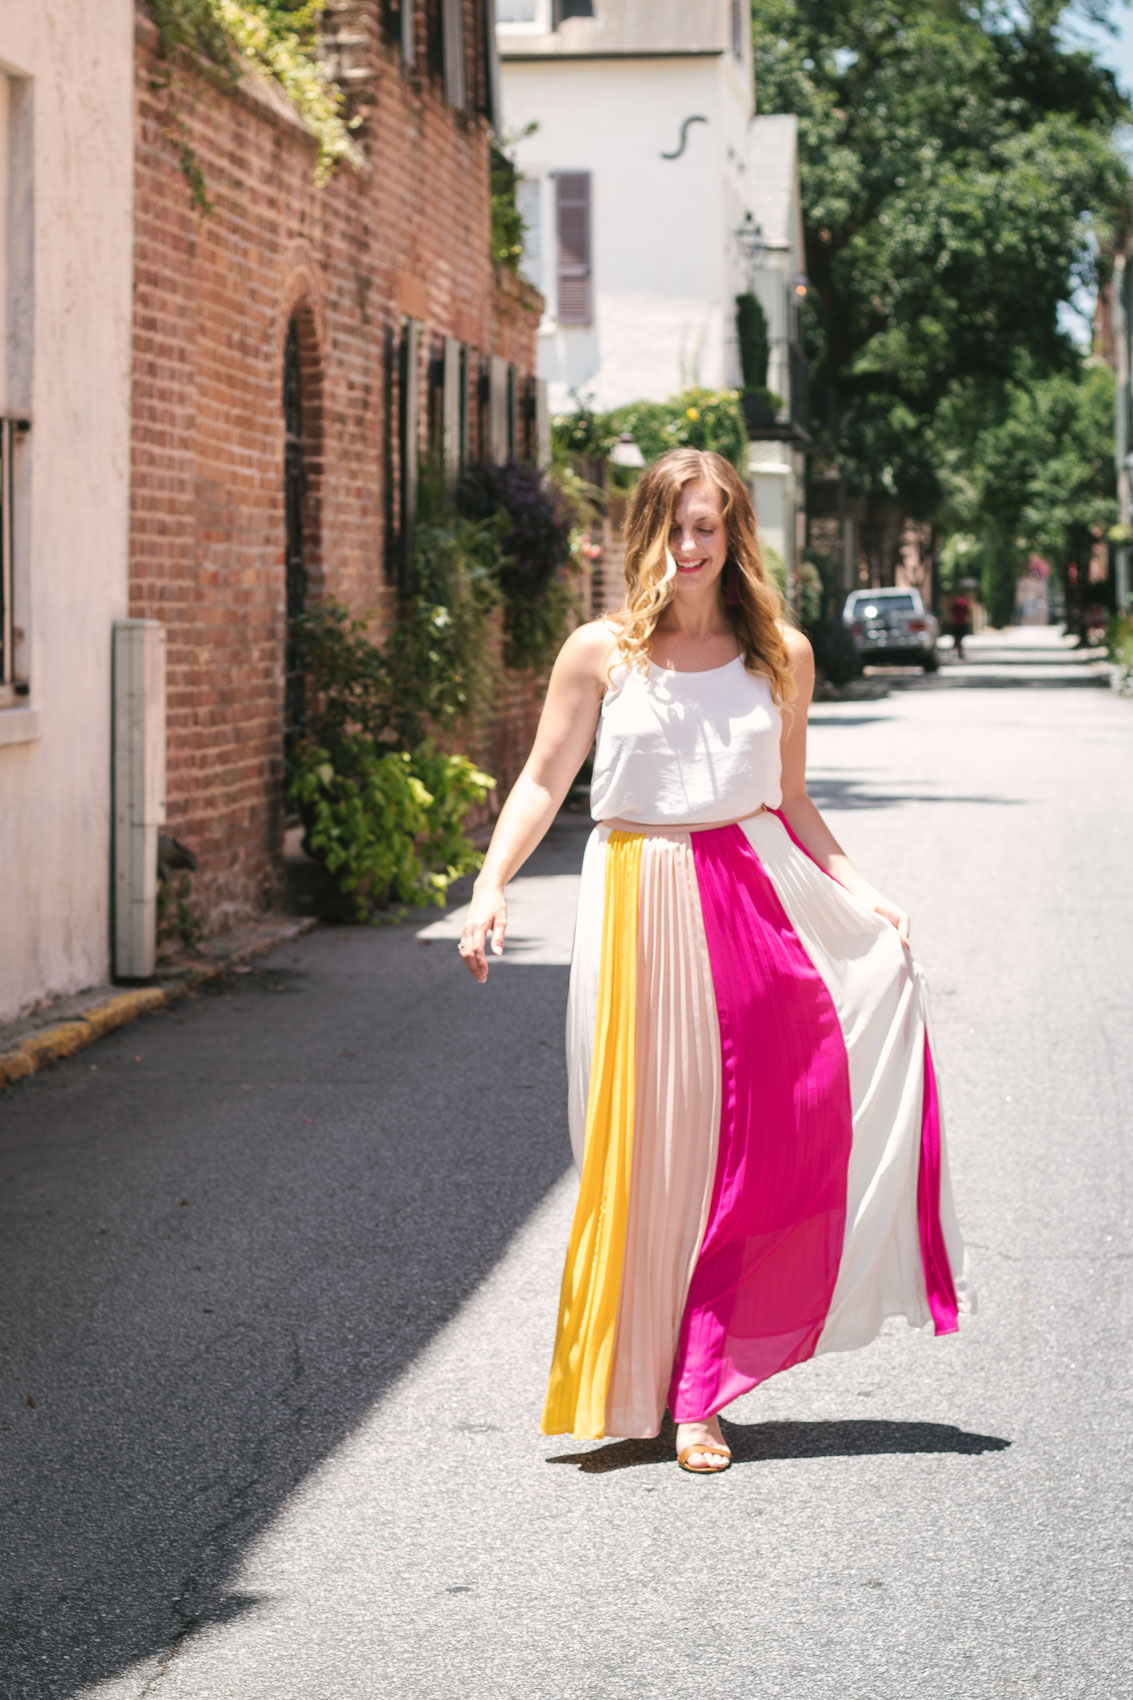 Easy summer outfit: Fashion blogger Allyn Lewis pairs a color blocked pleated skirt with a fresh white cami for an effortless look while exploring Charleston, SC.